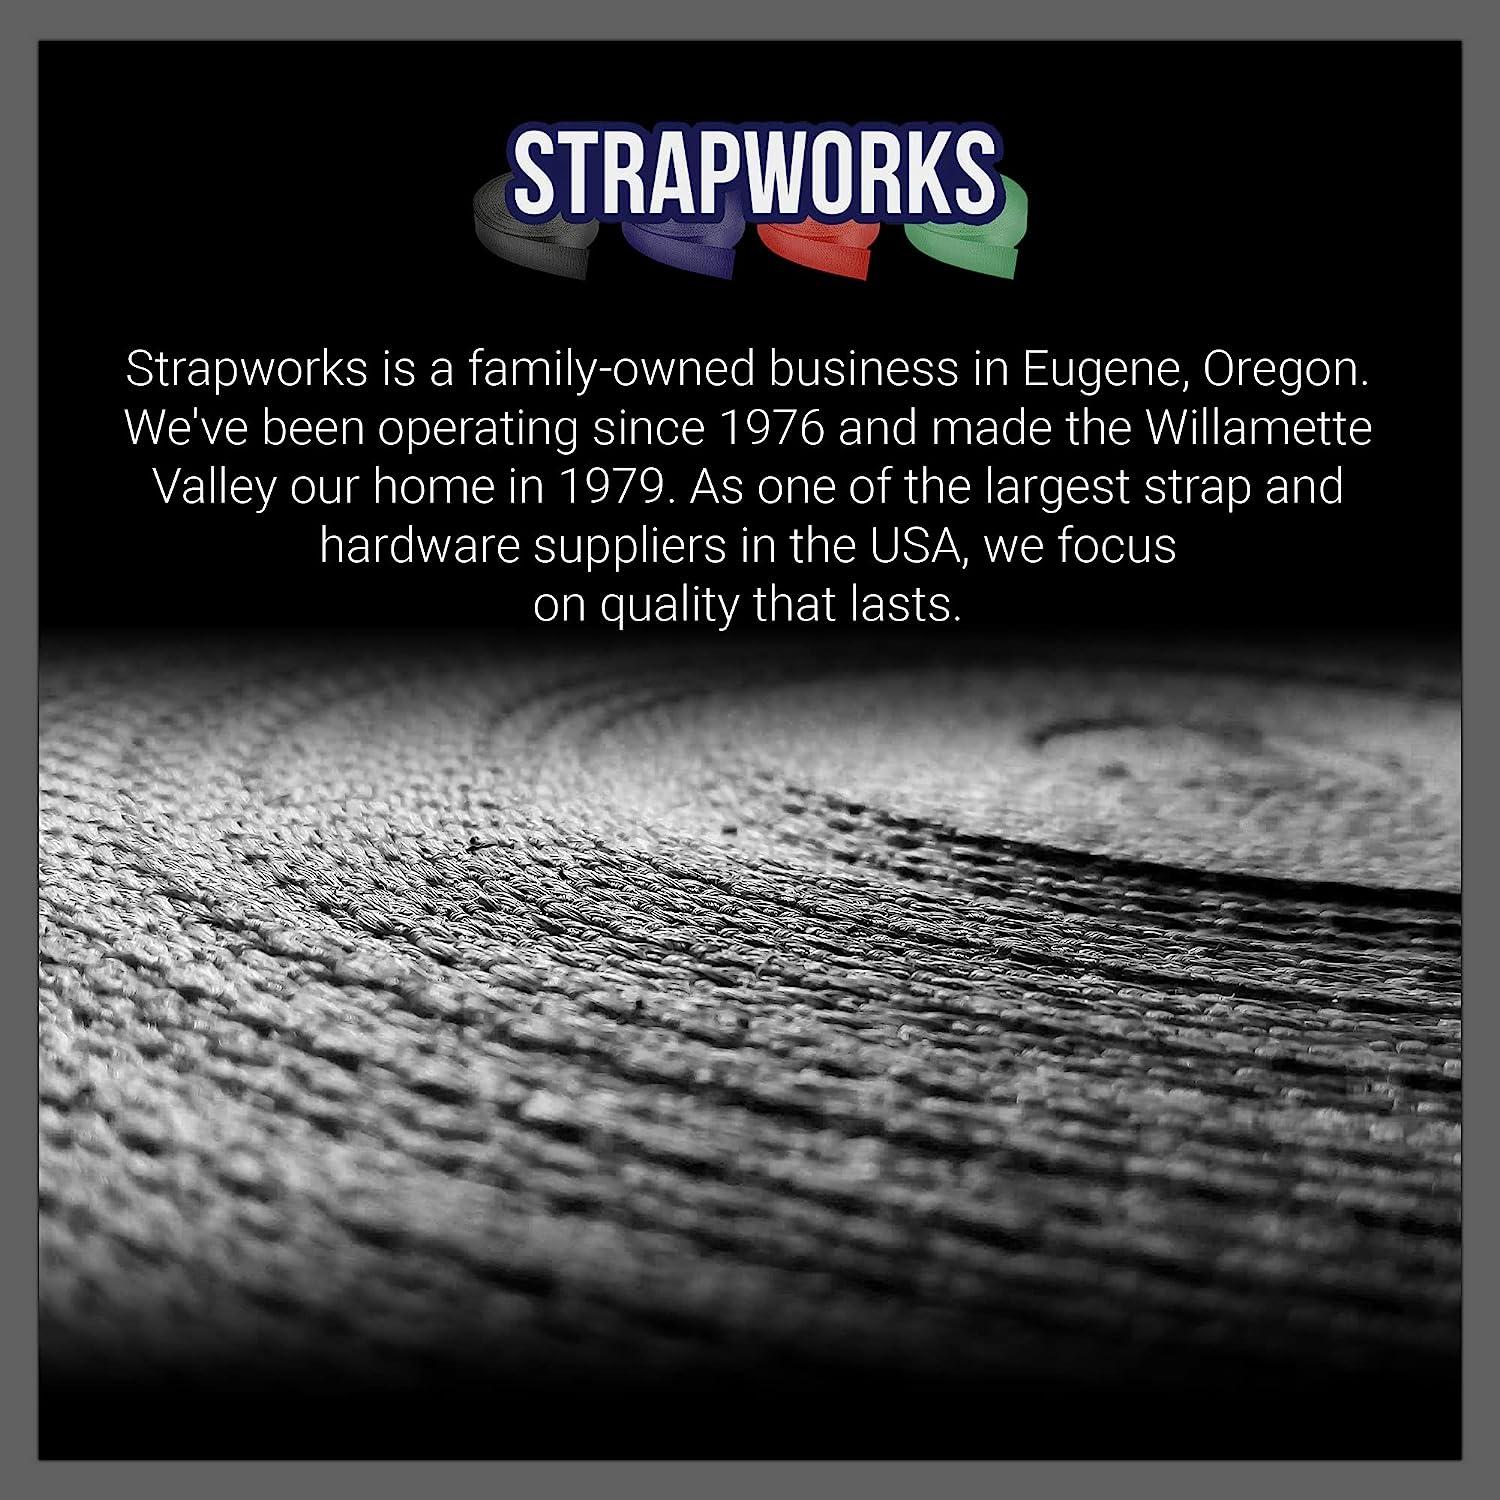 Strapworks Military Spec Flat Nylon Webbing – Milspec 17337 Strap for Slings, Backpack Straps, Tactical Projects, 1 inch x 10 Yards, 6 Colors